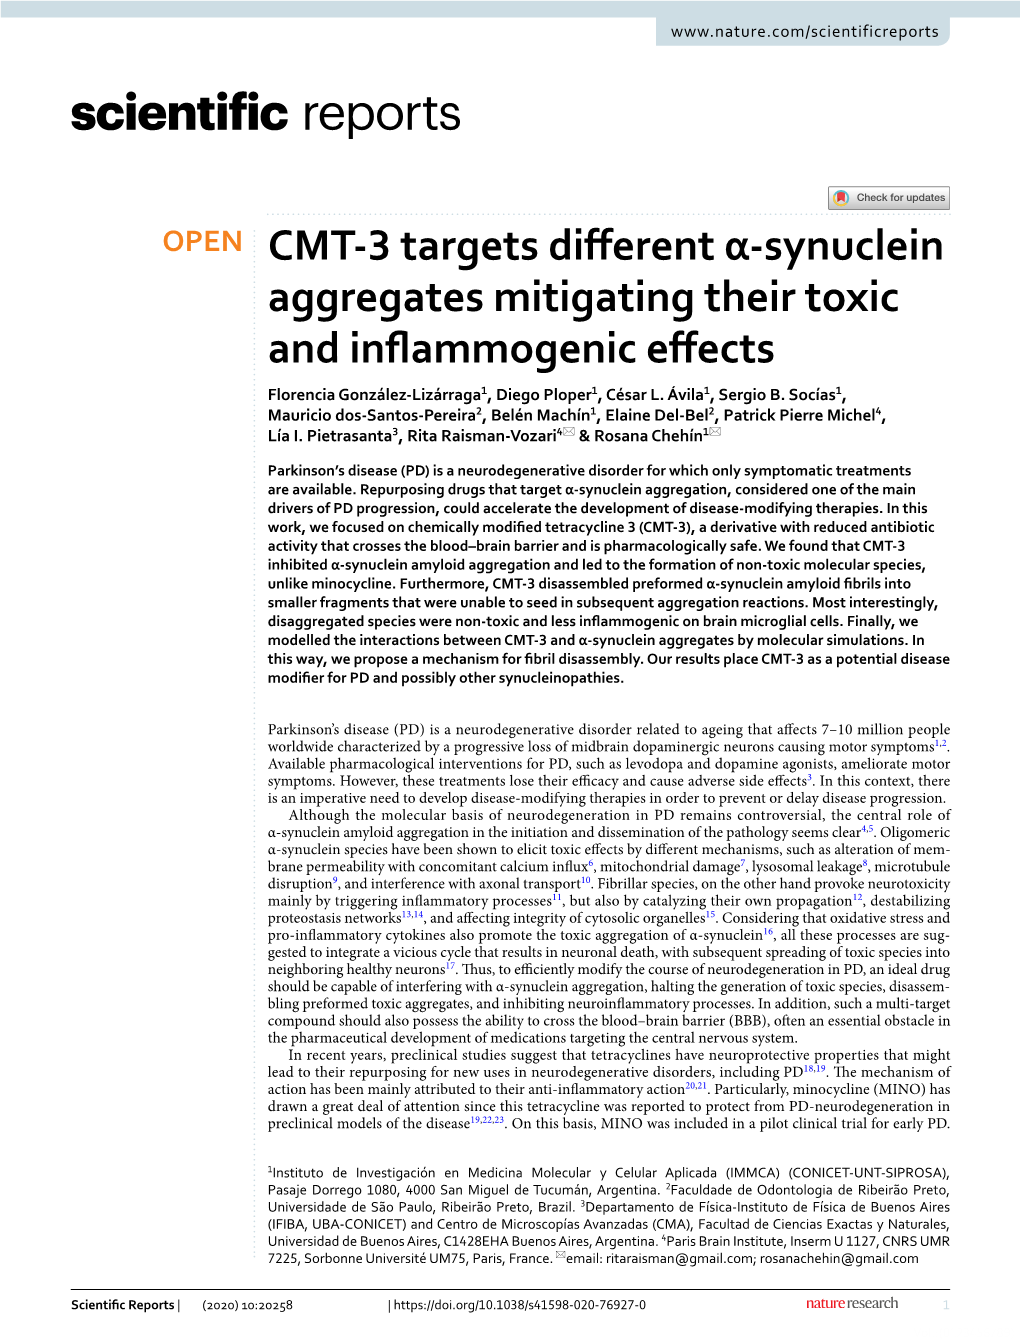 CMT-3 Targets Different Α-Synuclein Aggregates Mitigating Their Toxic